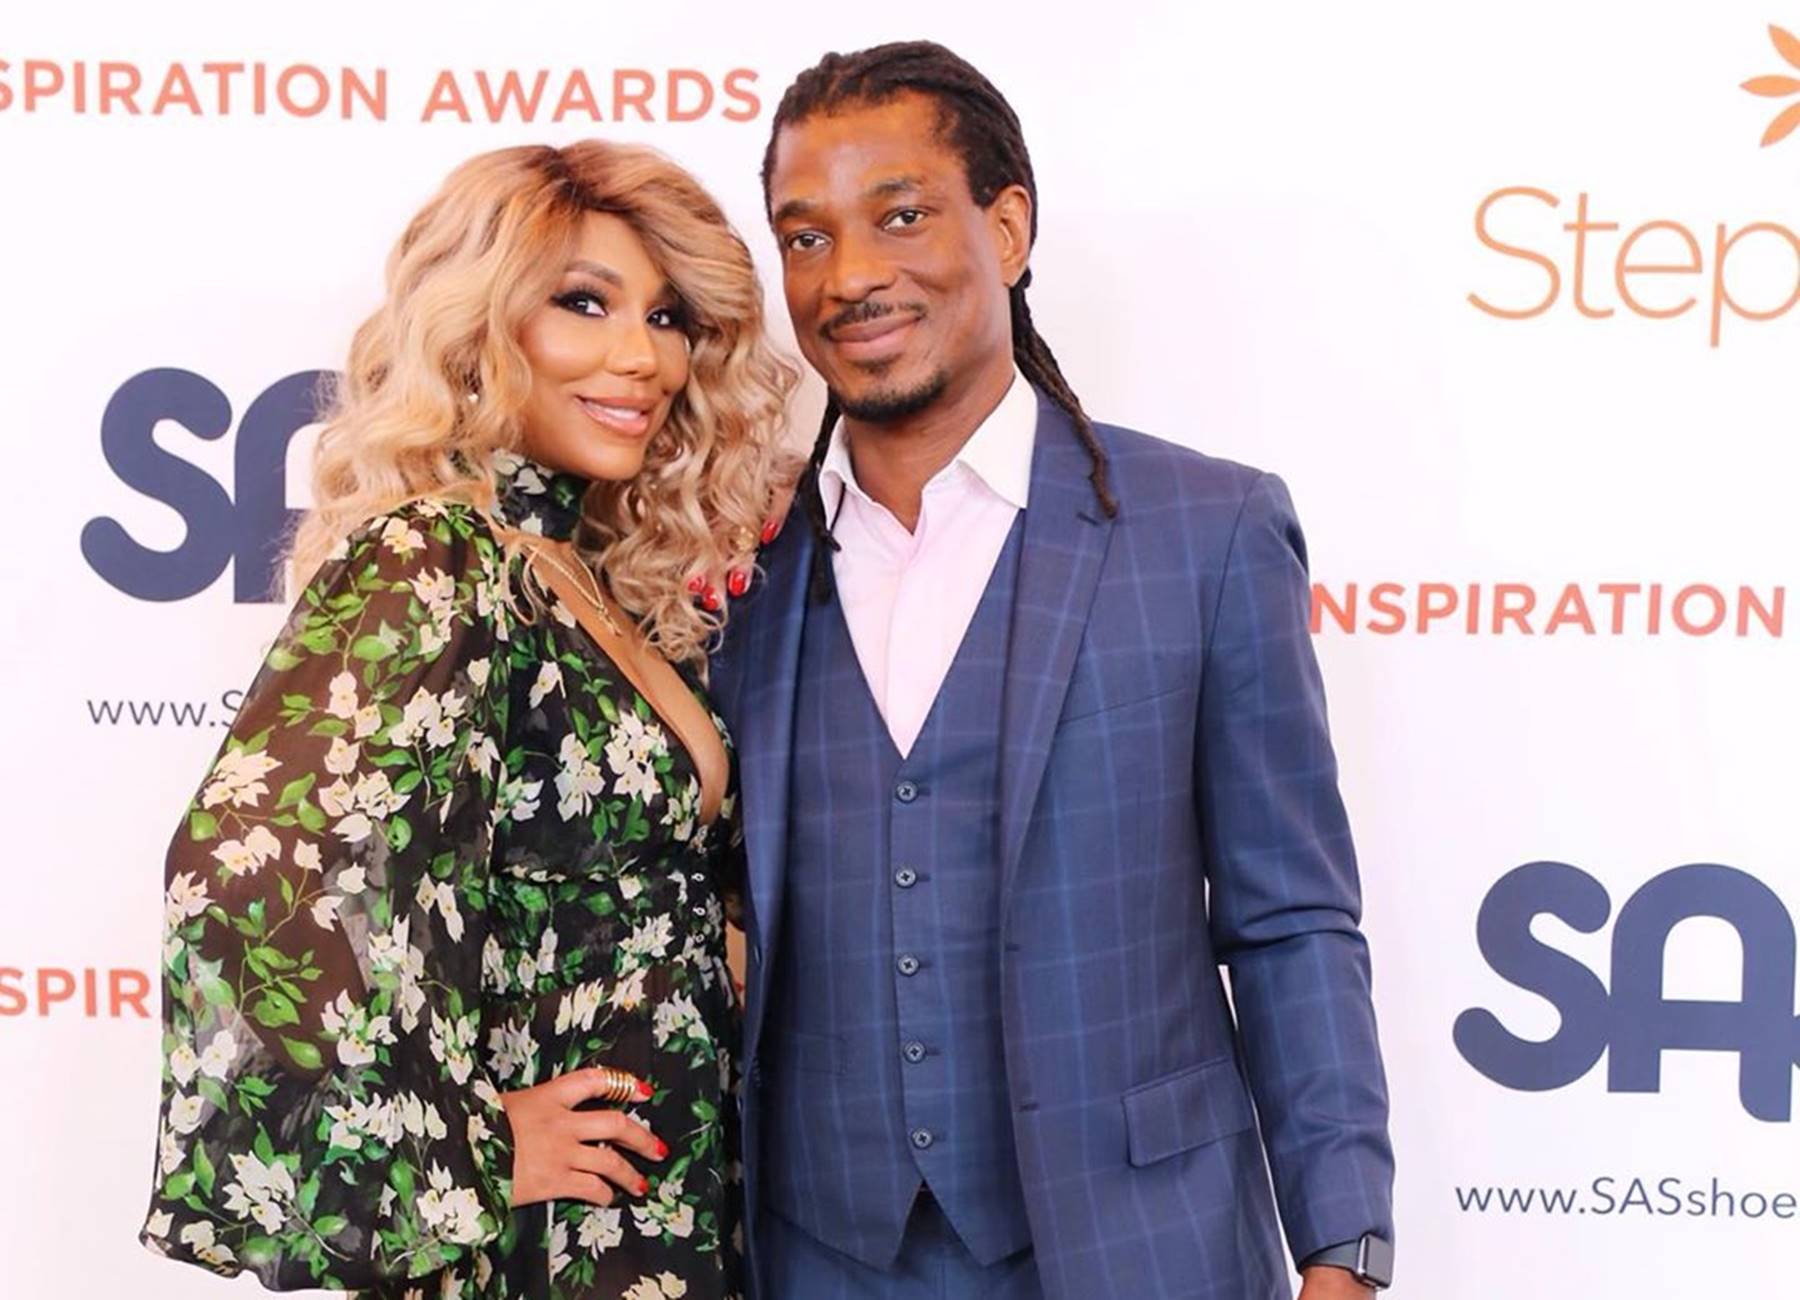 Tamar Braxton's BF, David Adefeso, Surprises Fans With New Financial Advice